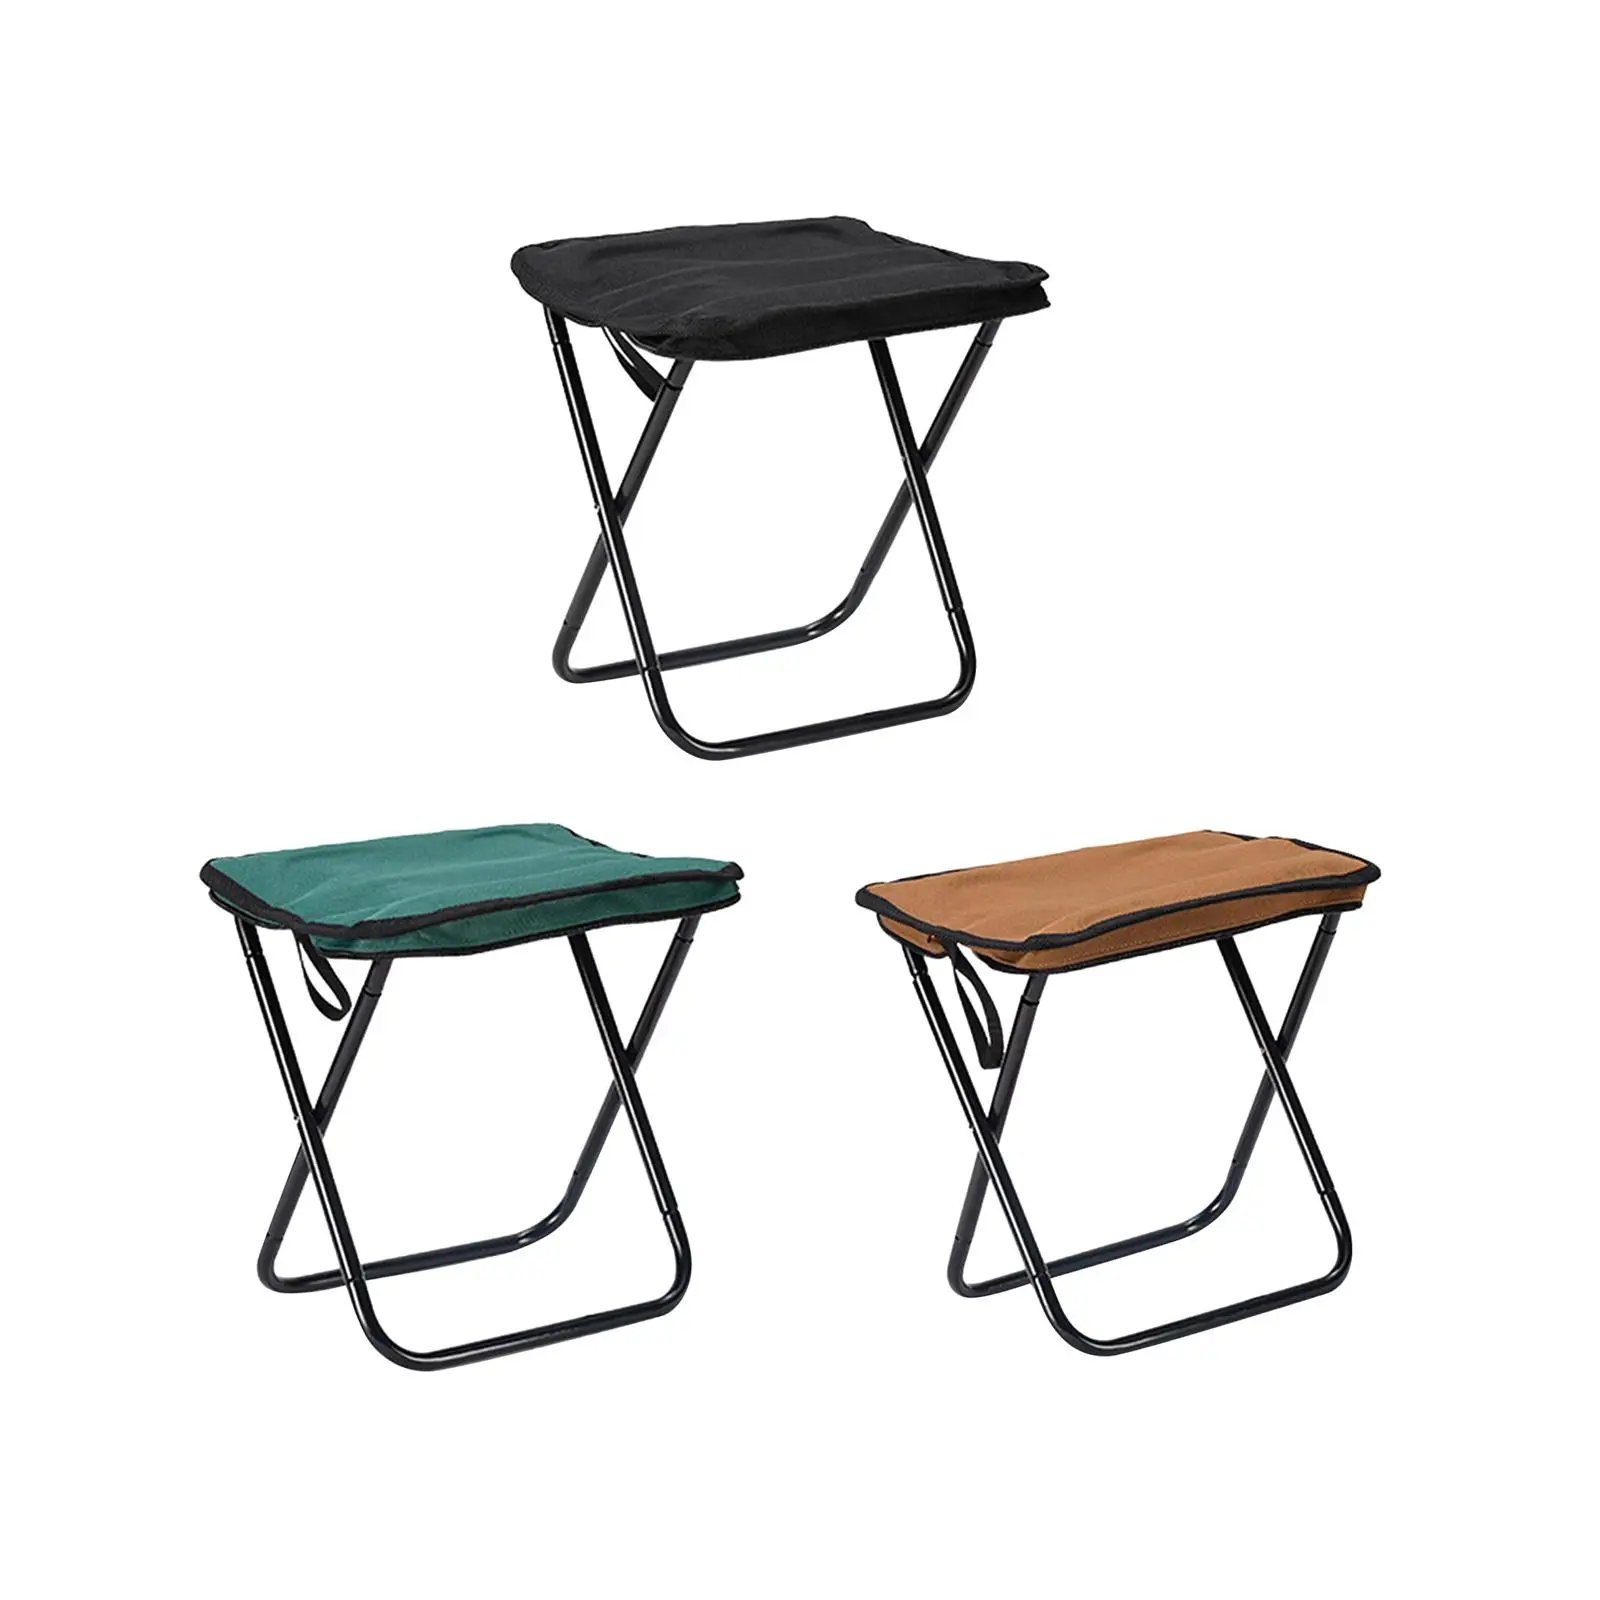 Camping stool, camping stool, adult compact chair, sturdy portable chair, mini